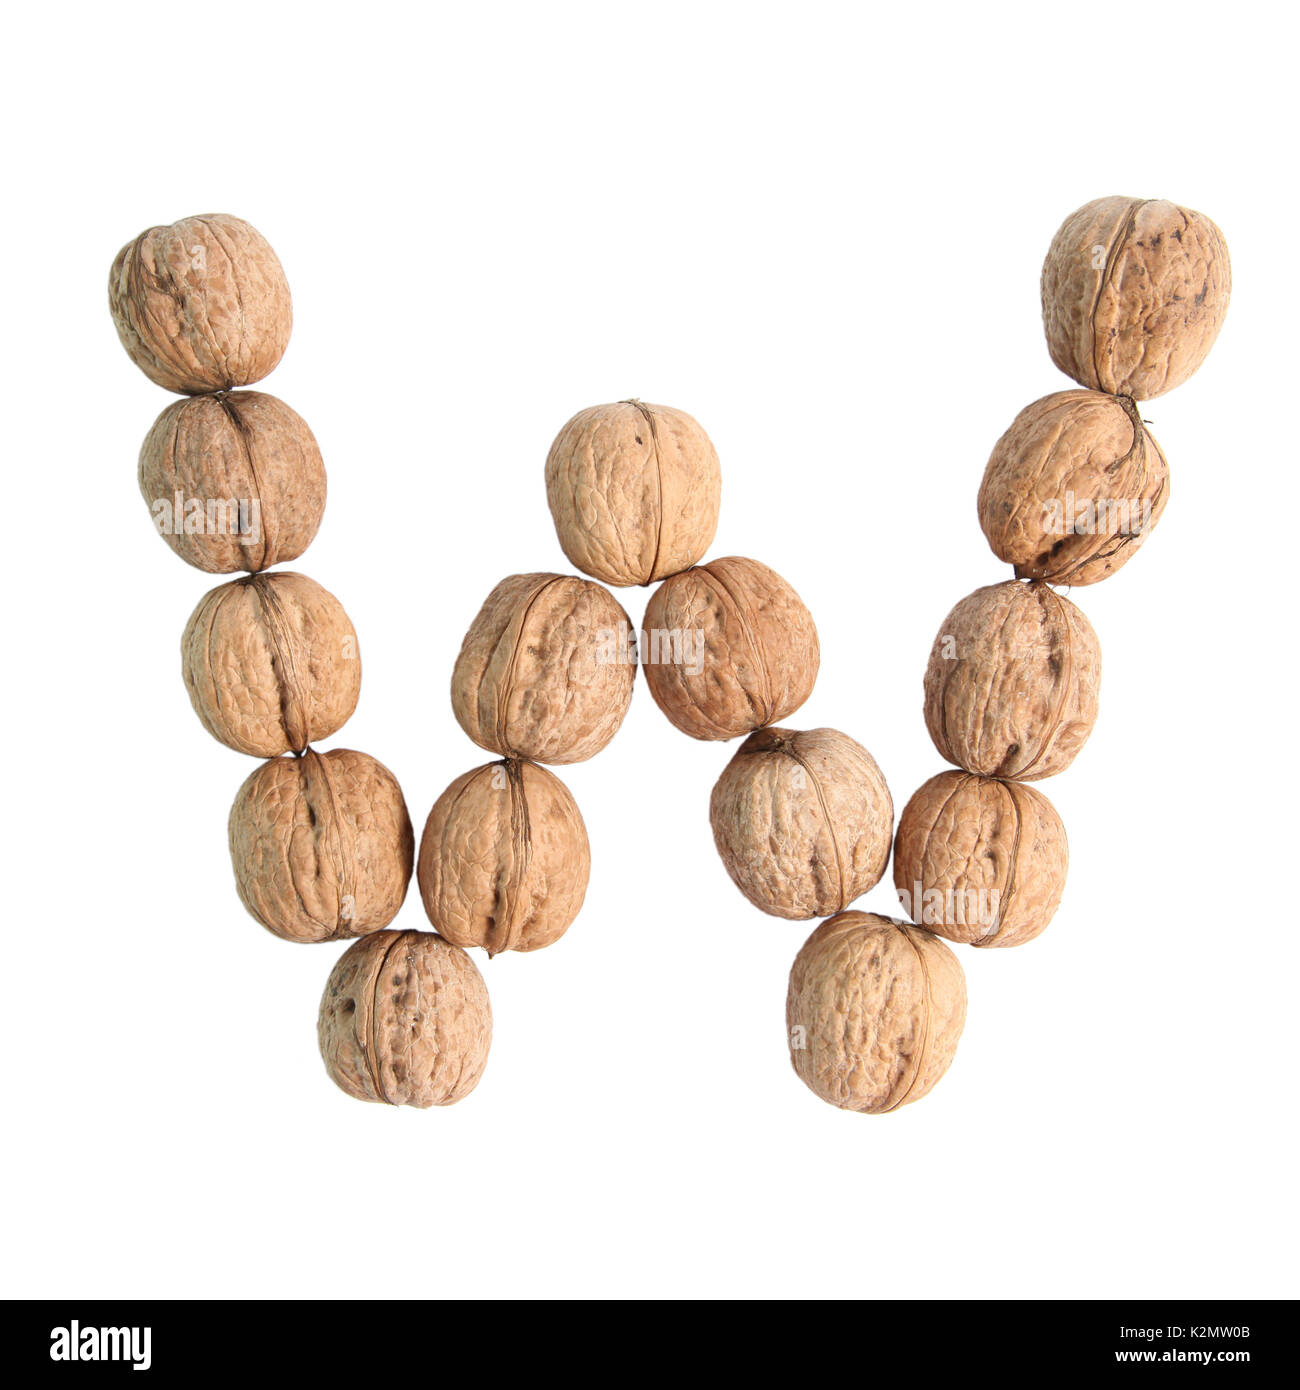 The group of walnuts on white background, making letter W. Studio shot Stock Photo